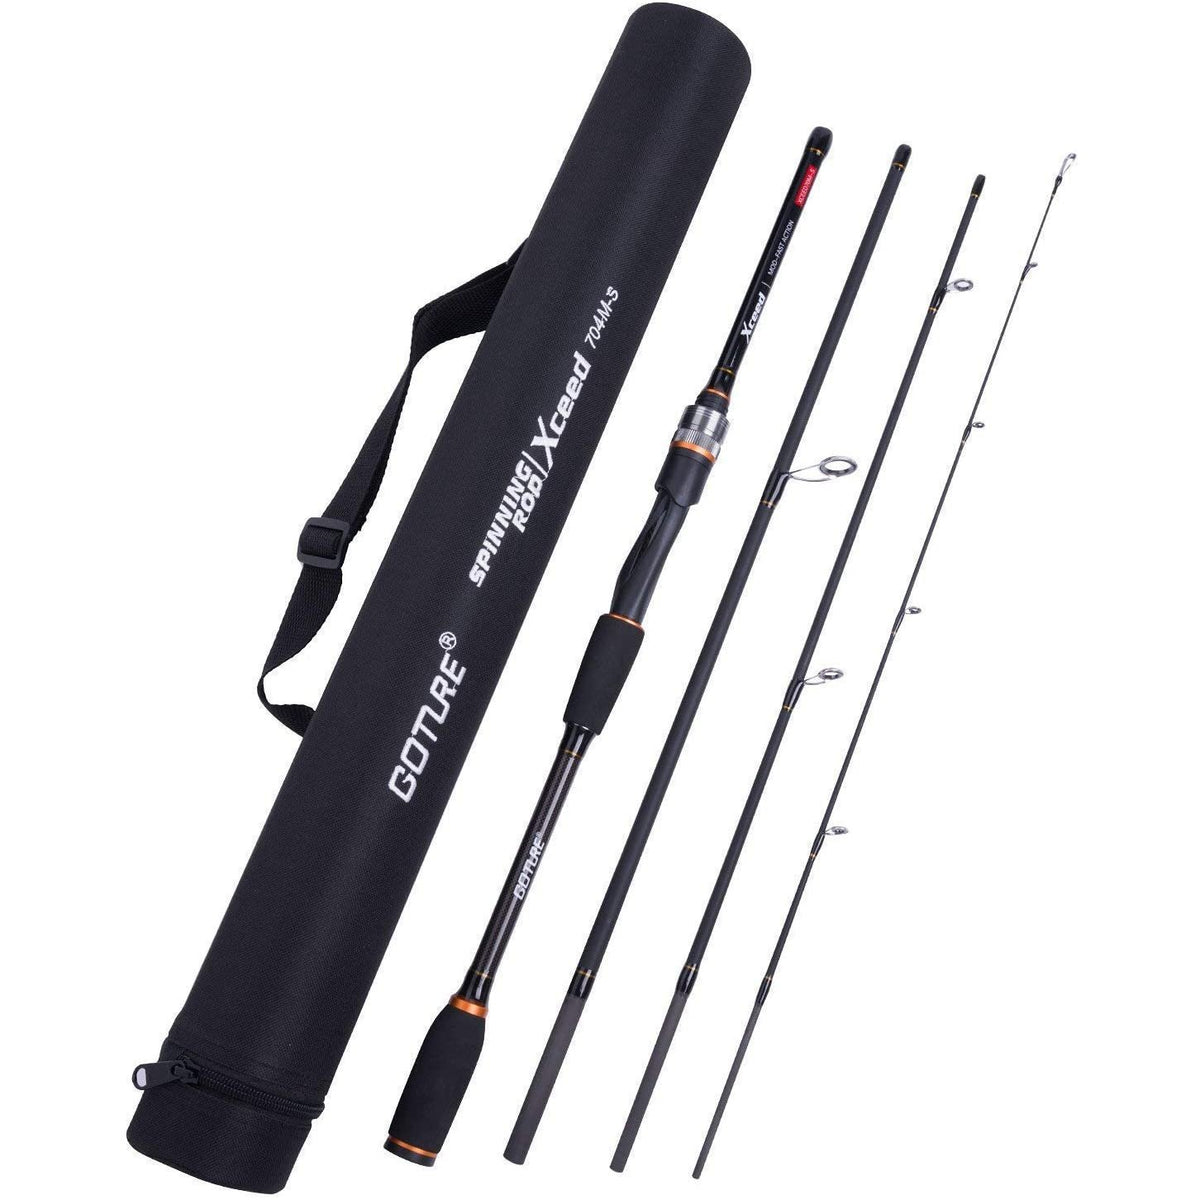 Goture Casting Fishing Rods - Travel Fishing Rods - Lightweight